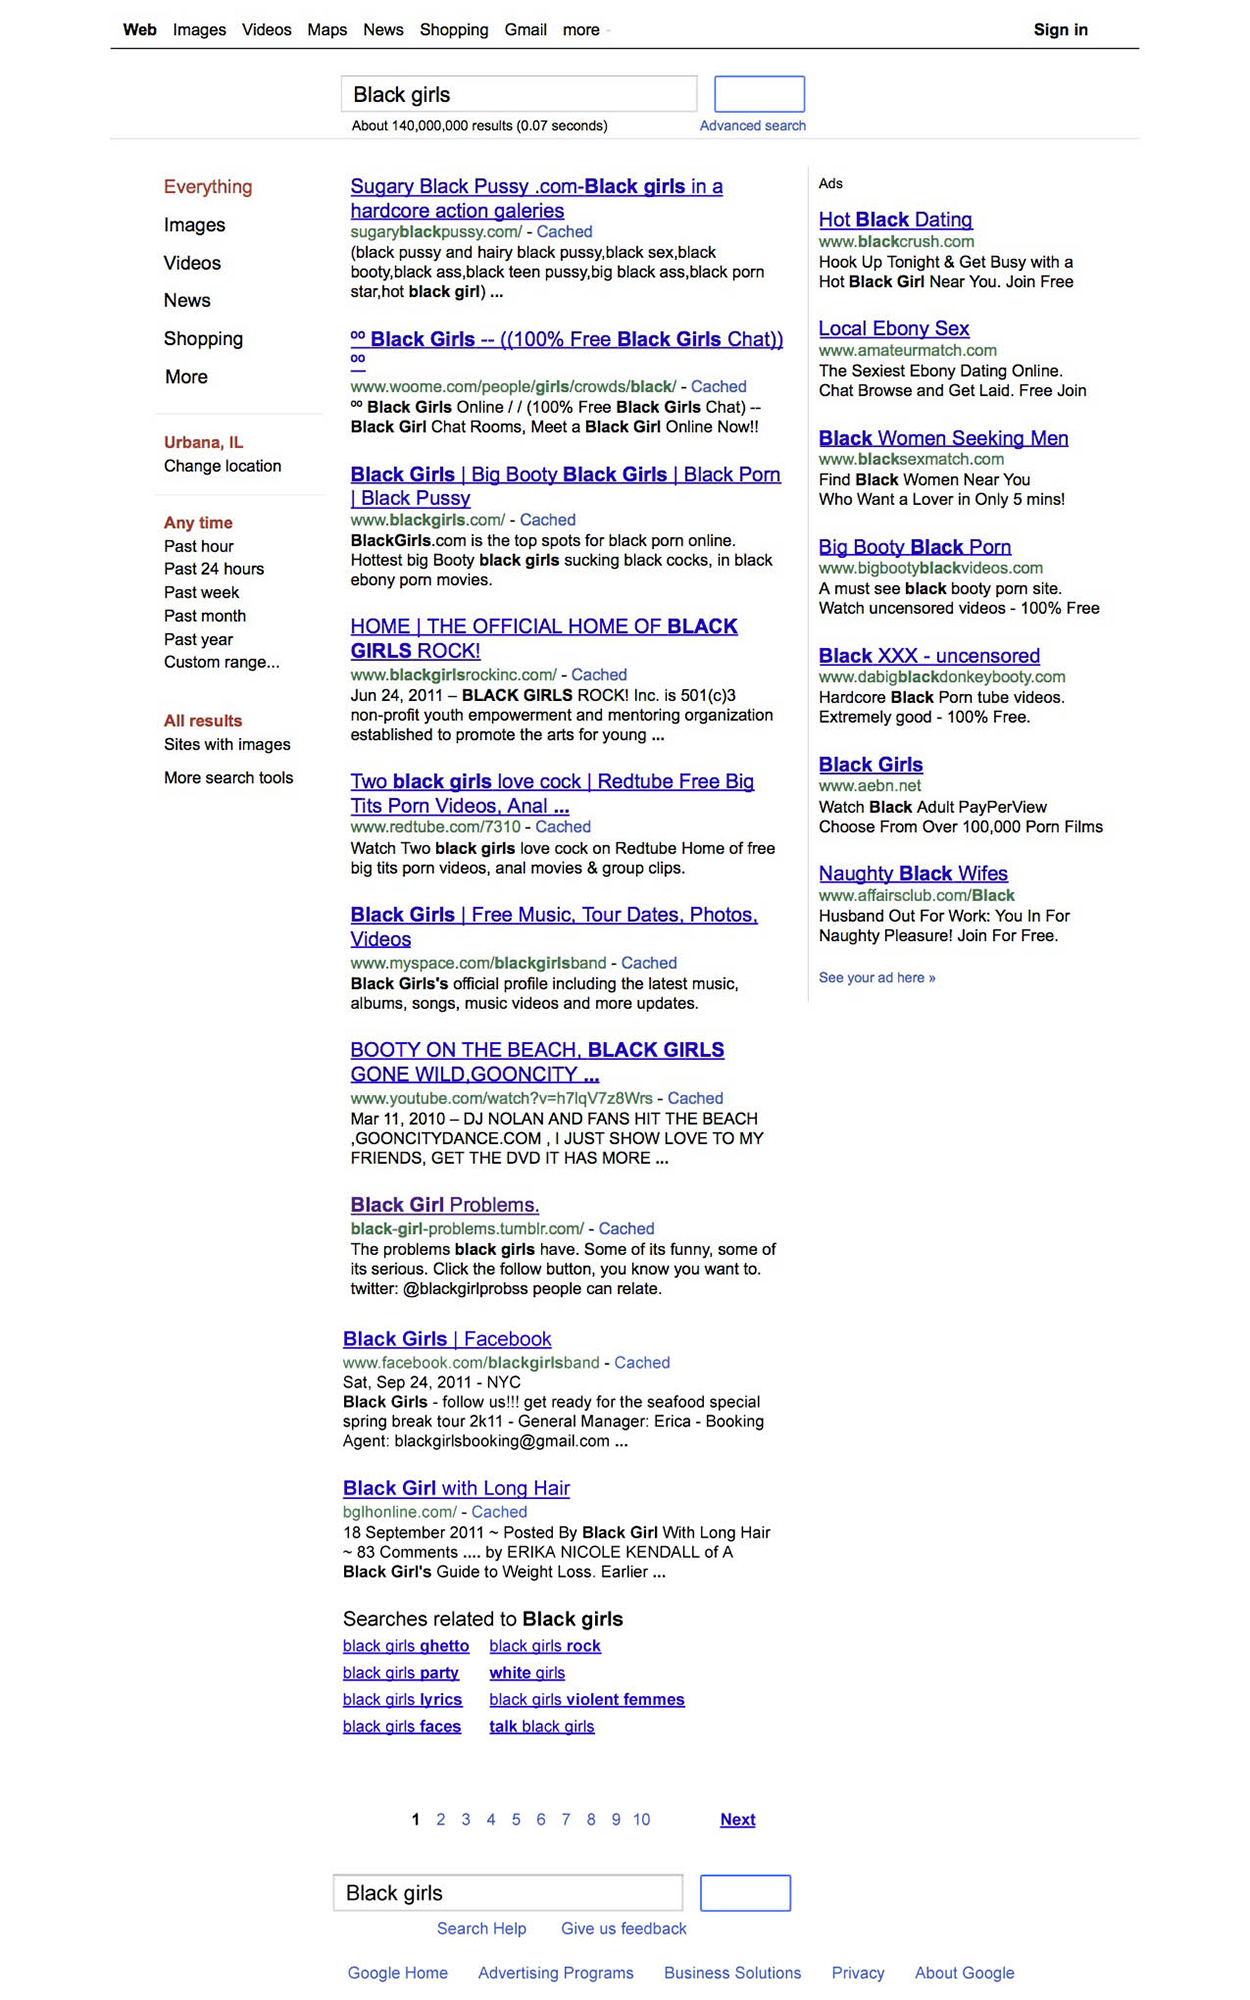 First page of search results on keywords “black girls,” September 18, 2011.